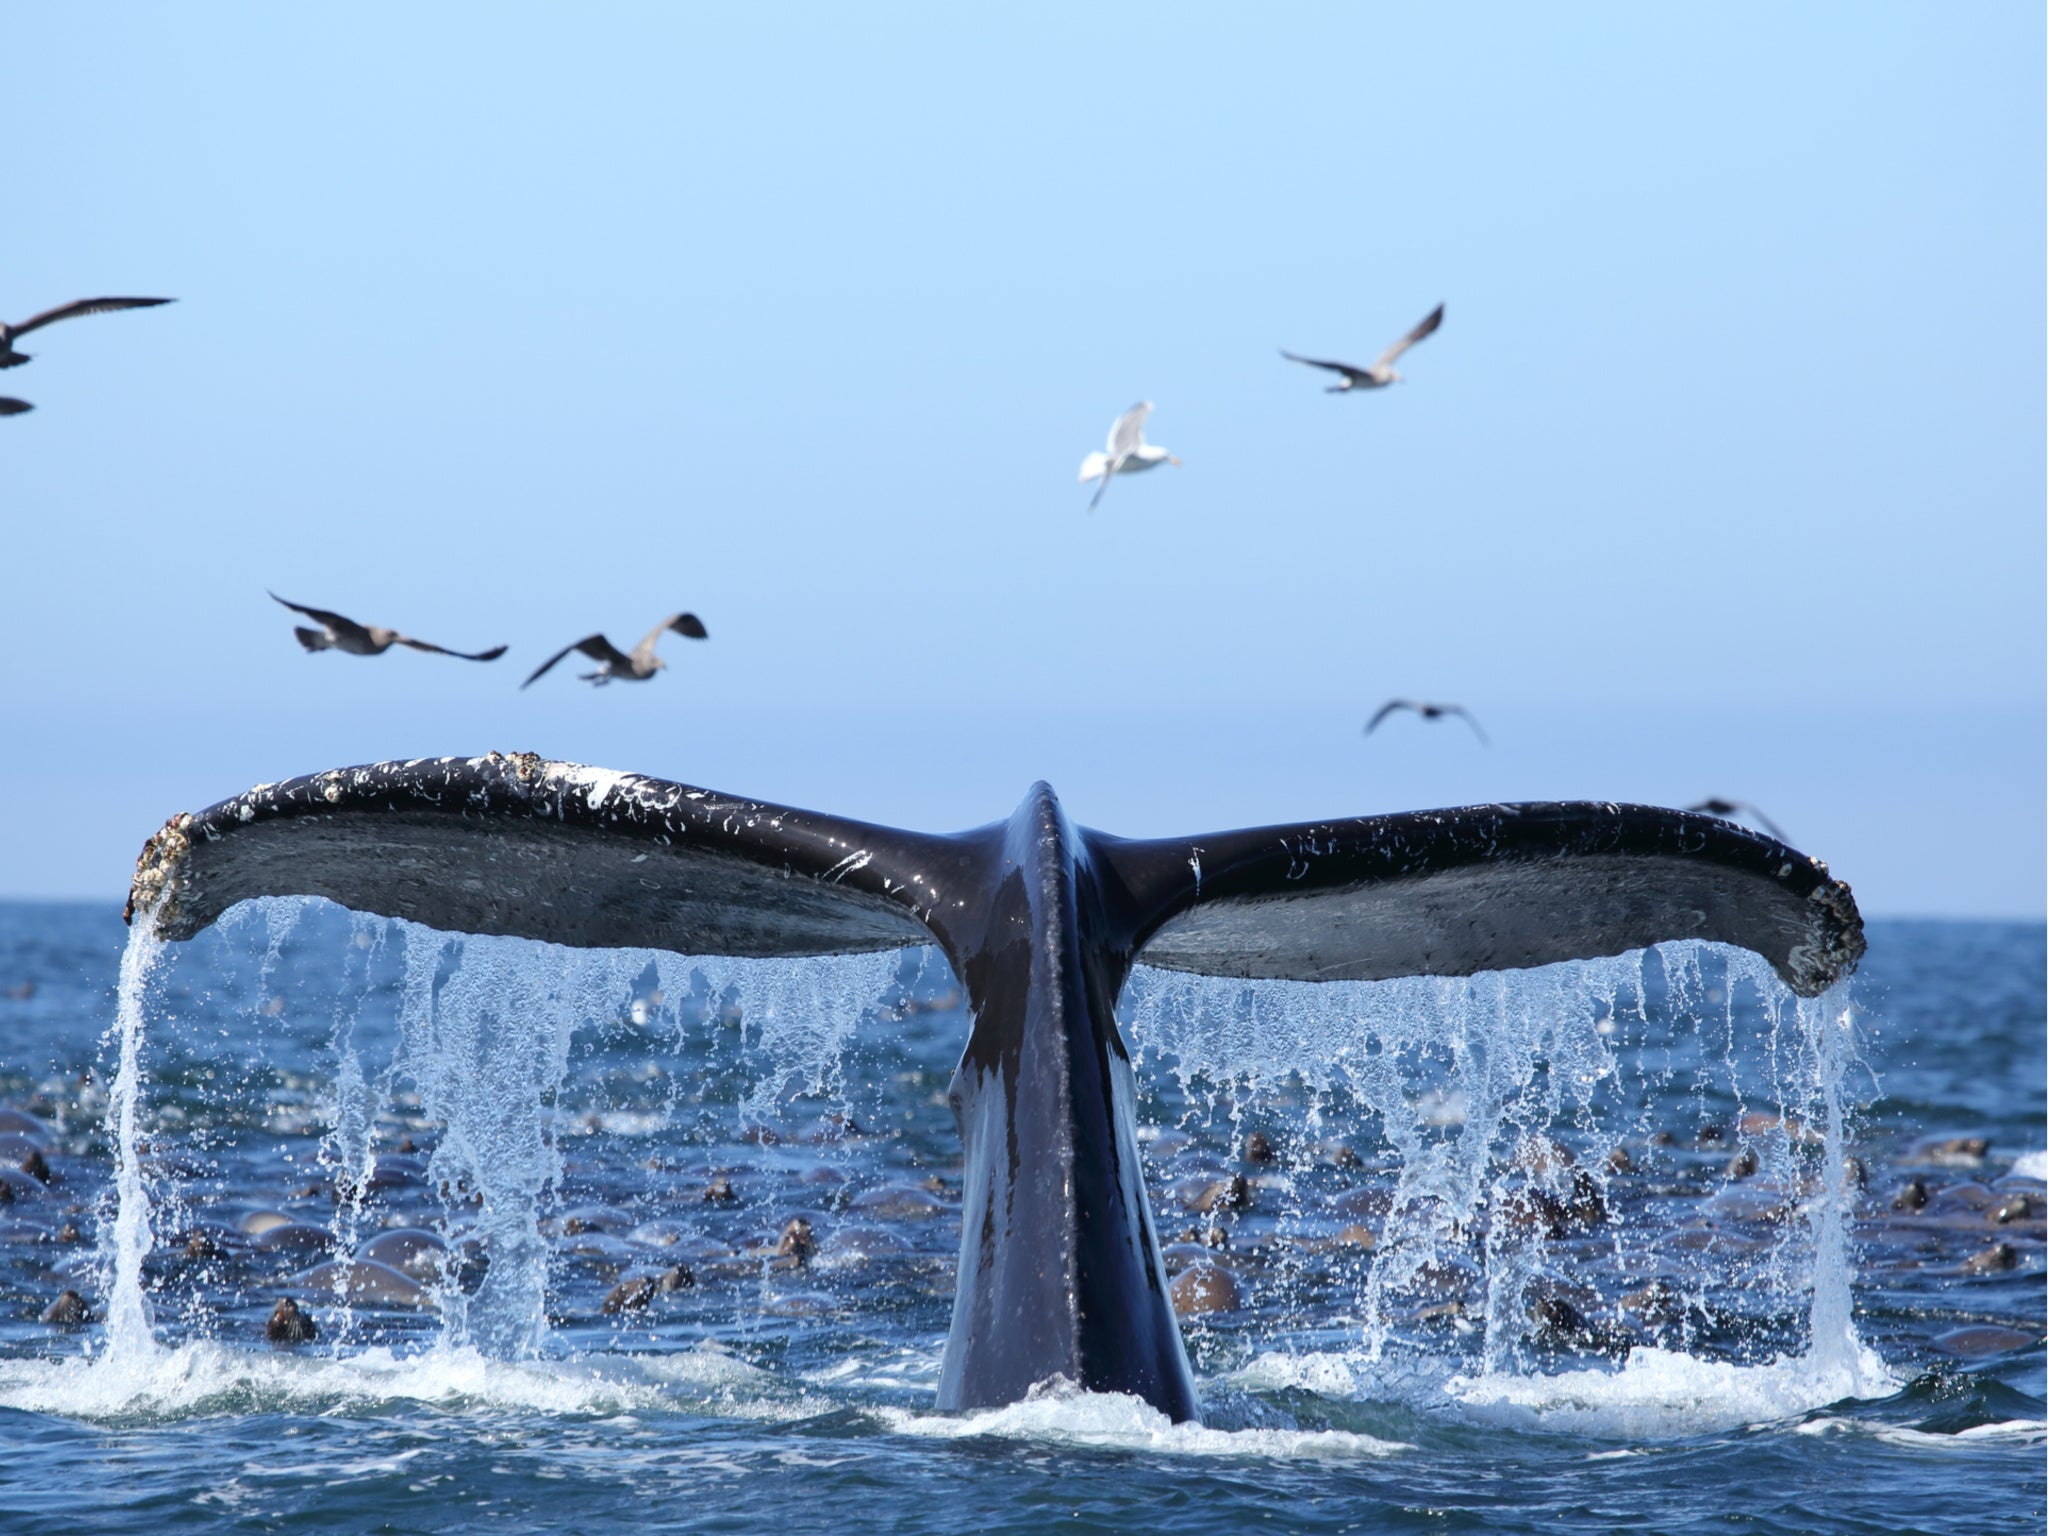 Humpback whales and blue whales can be spotted between May and November